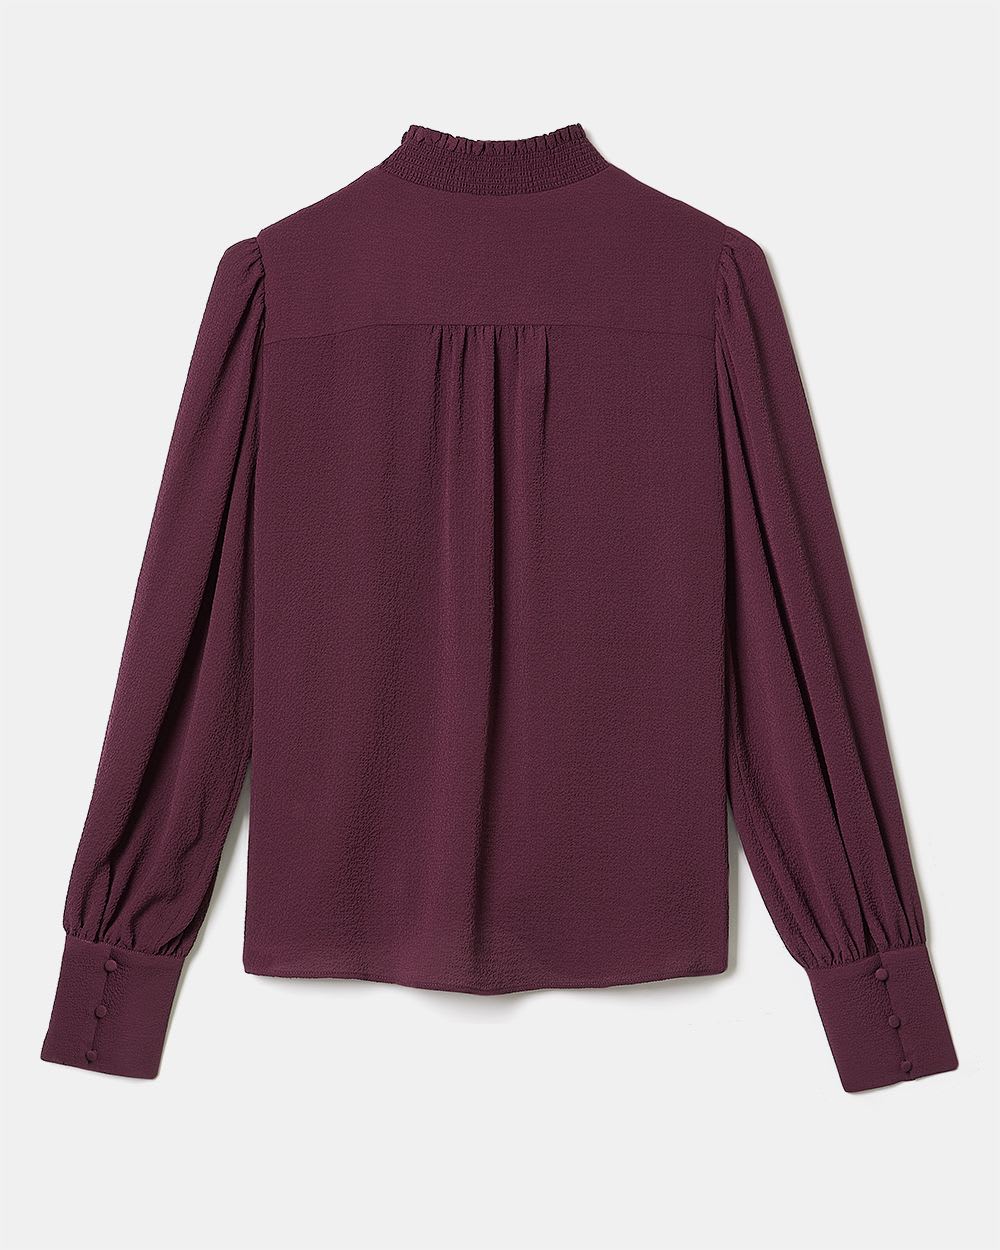 Grainy Dobby Long Sleeve Blouse with Smocking and Buttoned Neckline